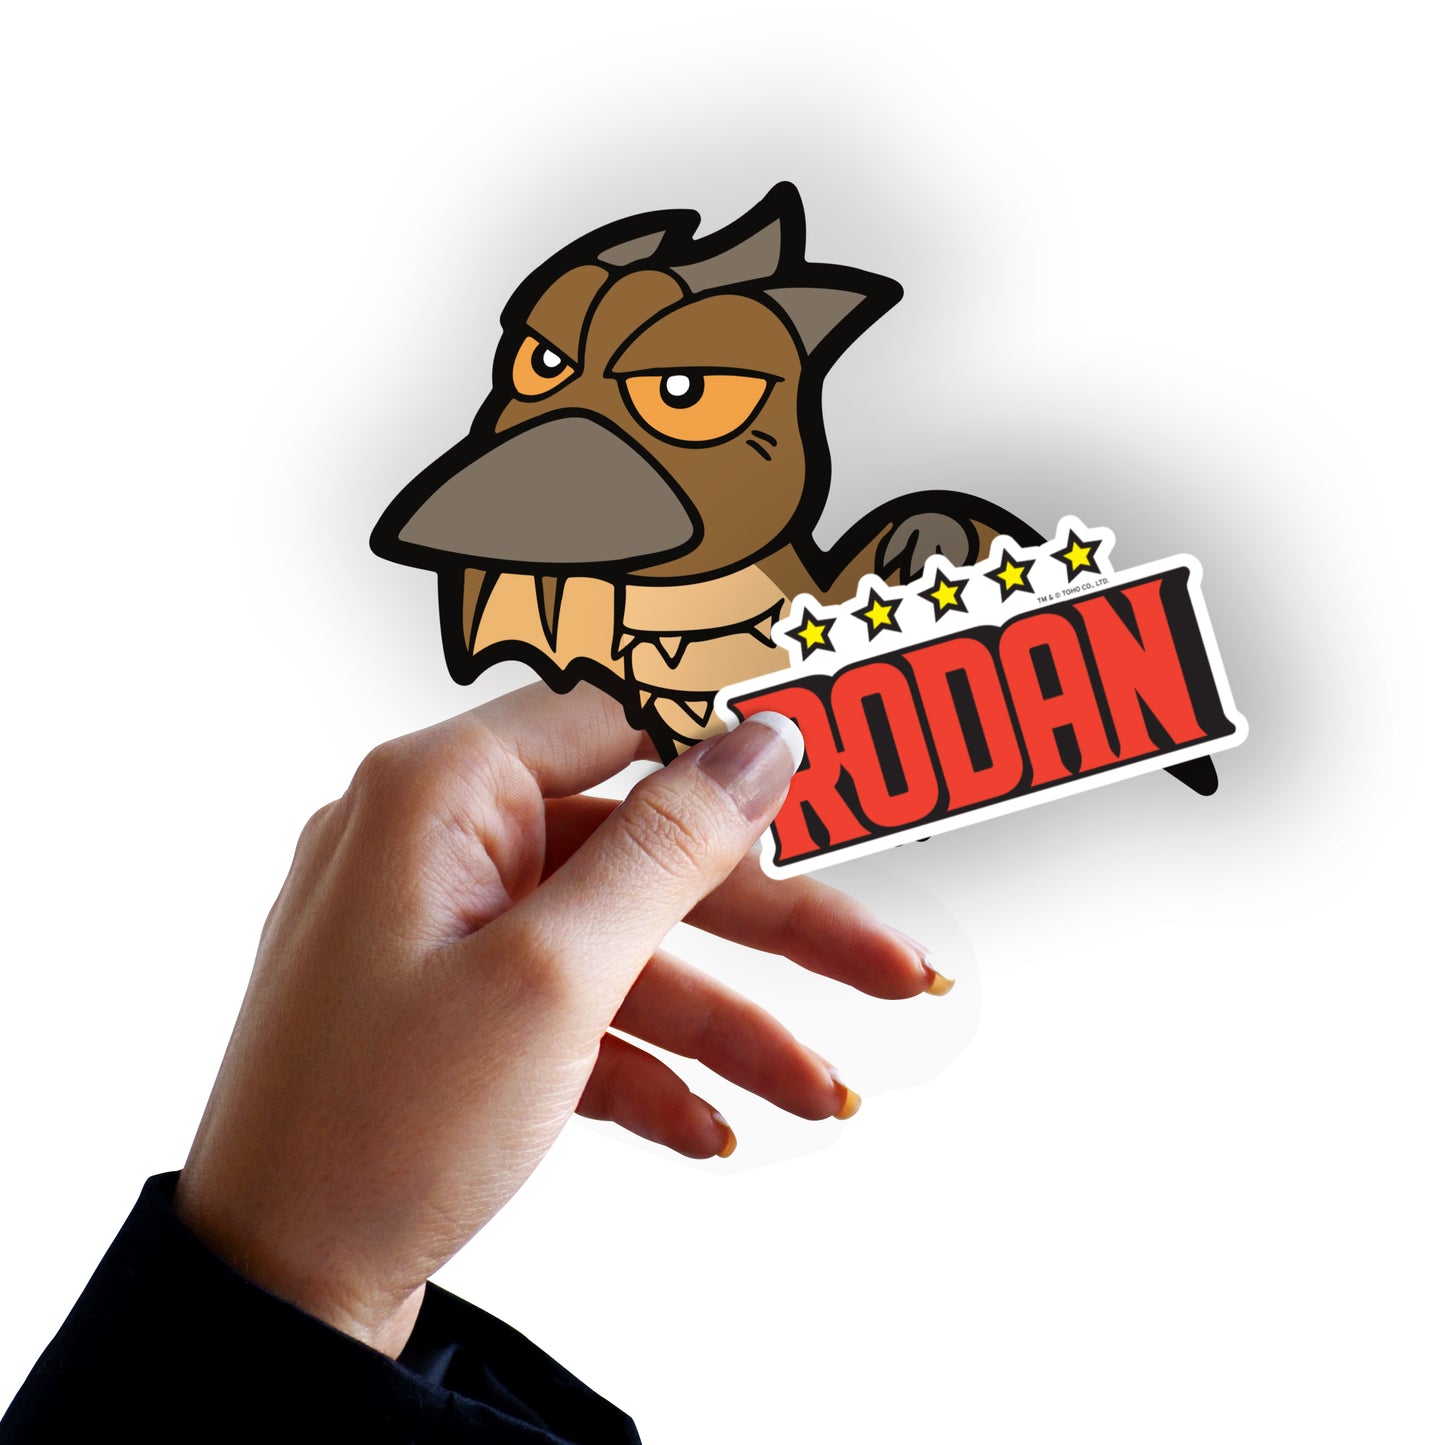 Sheet of 5 -Godzilla: Rodan Deformed Minis        - Officially Licensed Toho Removable     Adhesive Decal